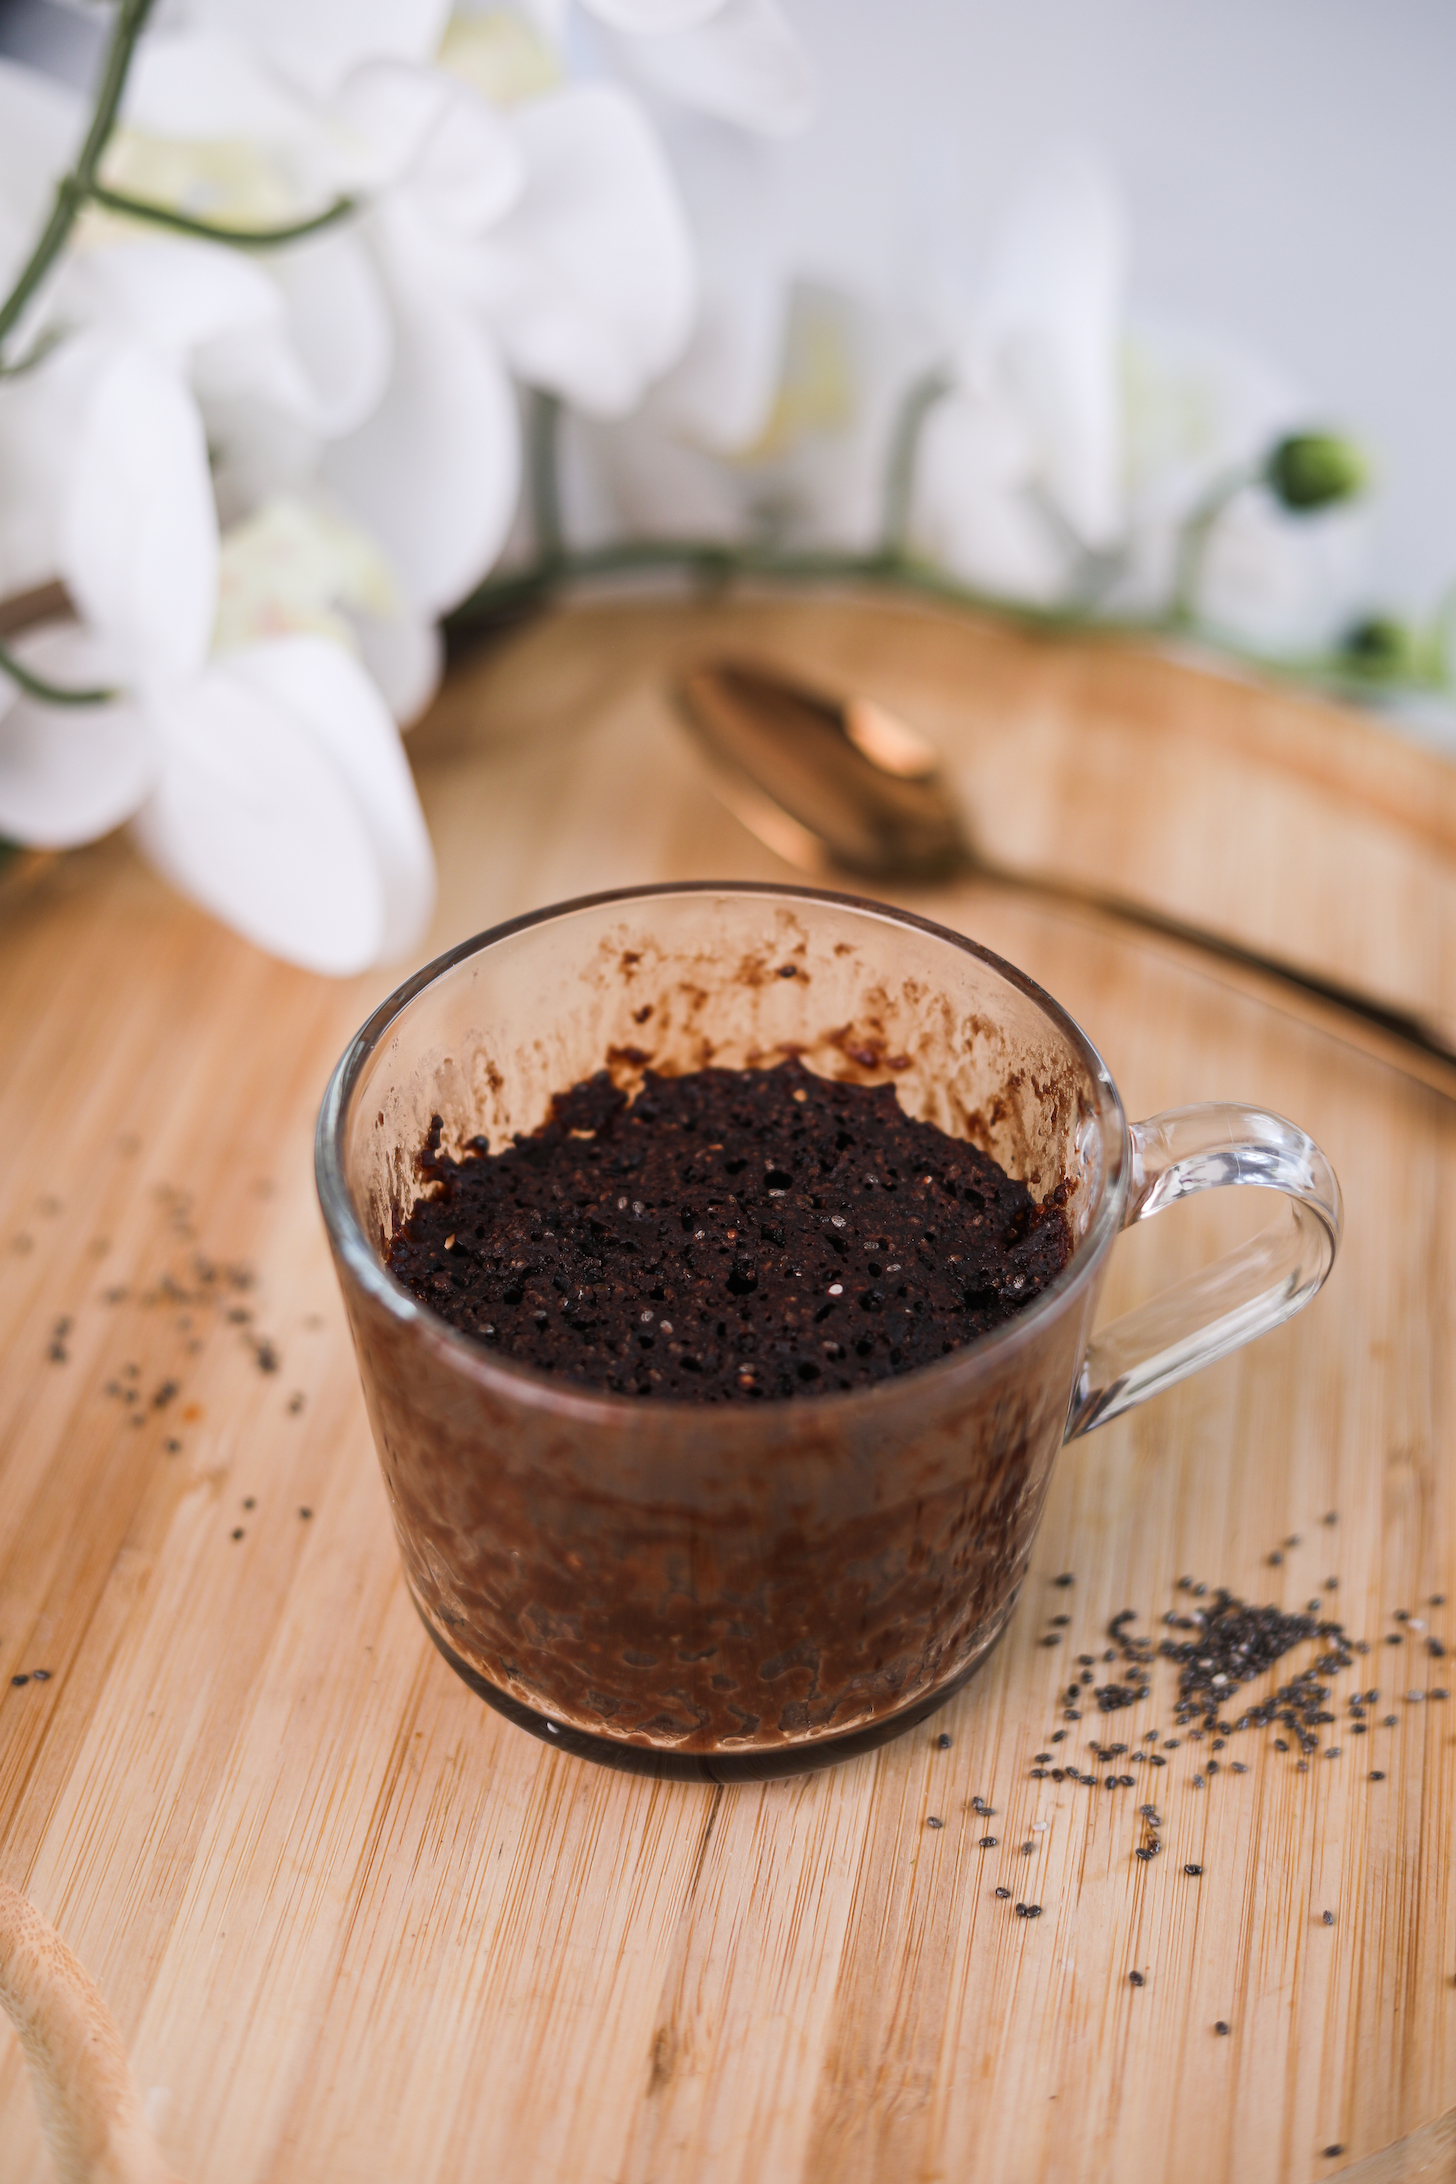 A perspective shot of a mug of chocolate cake with chia seeds around it and flowers in the background.